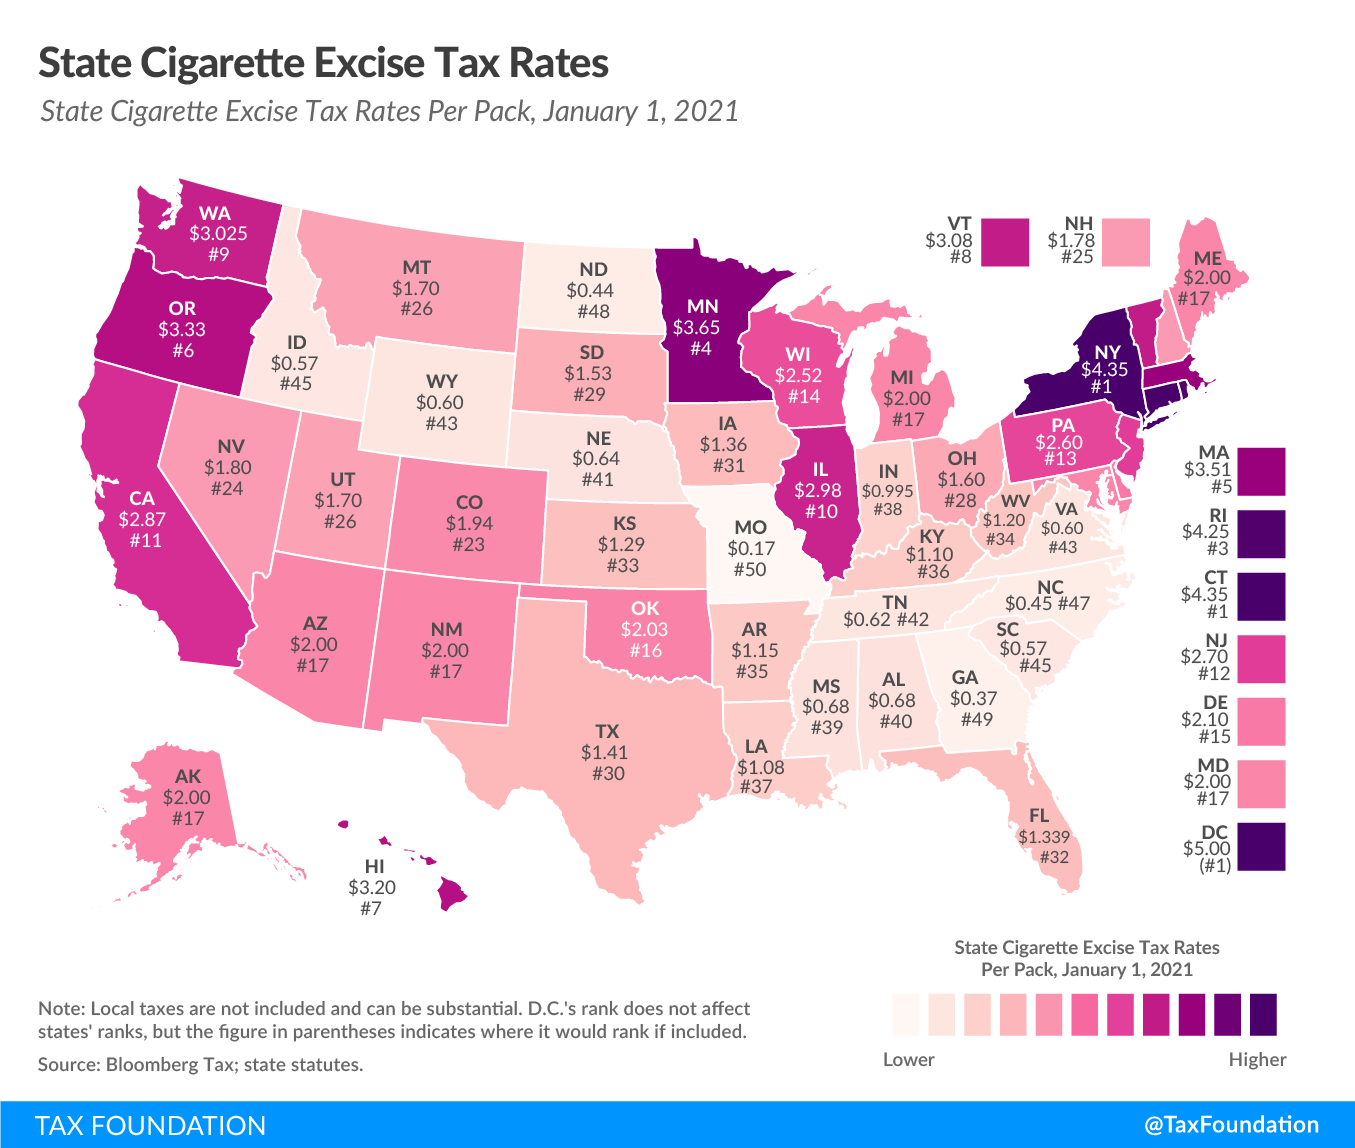 2021 state cigarette tax rates, 2021 state tobacco tax rates, 2021 excise taxes and 2021 excise tax trends